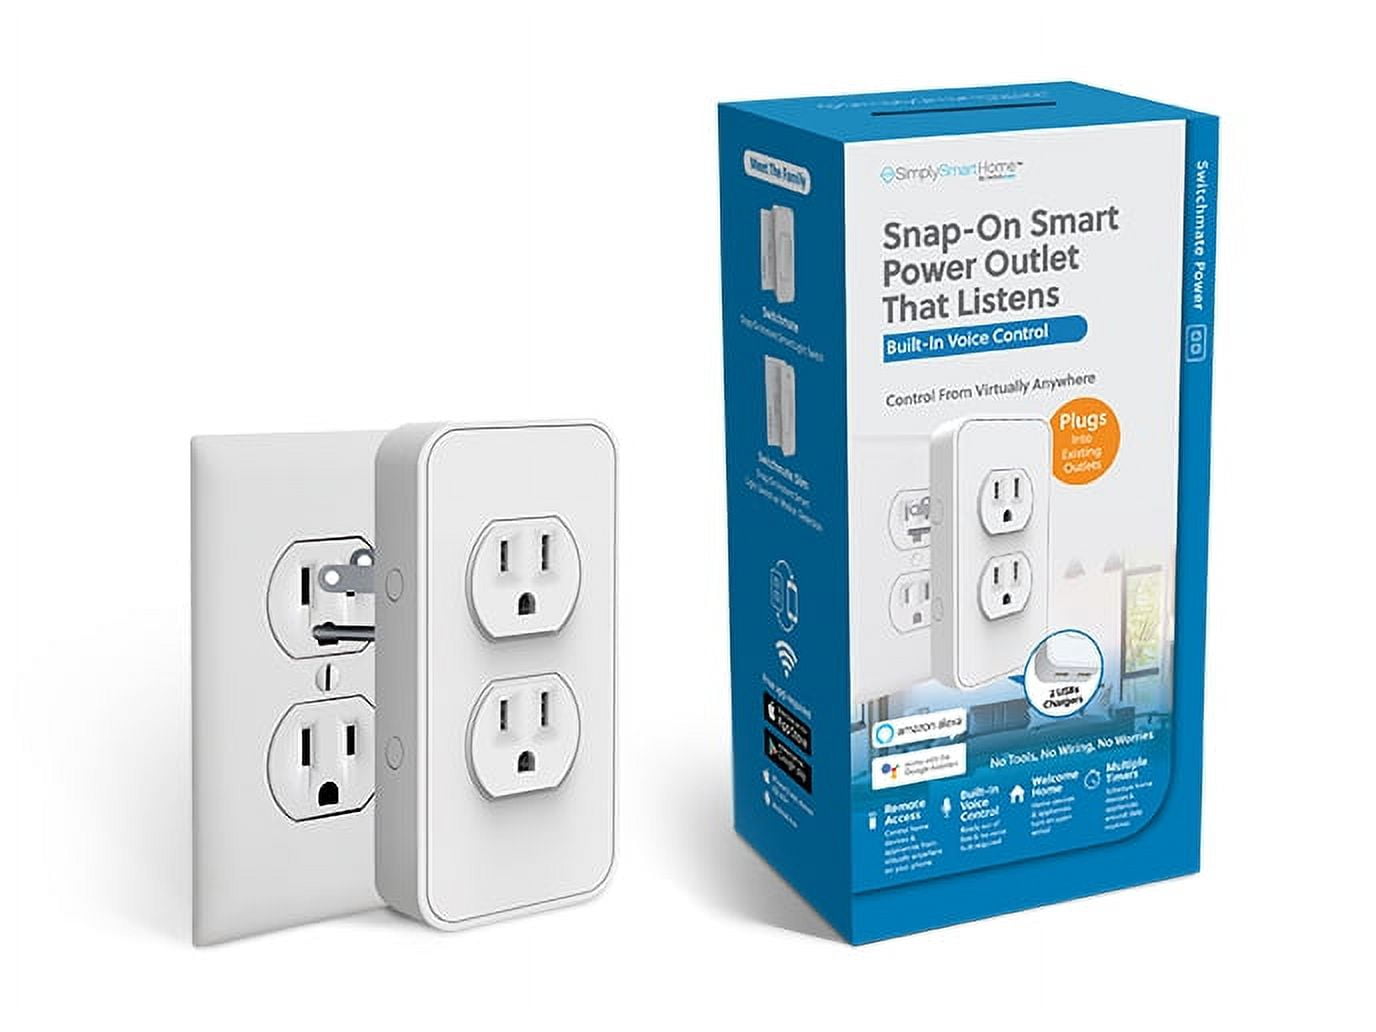 Upgrade Your Outlets With 30 Percent off These Smart Plugs